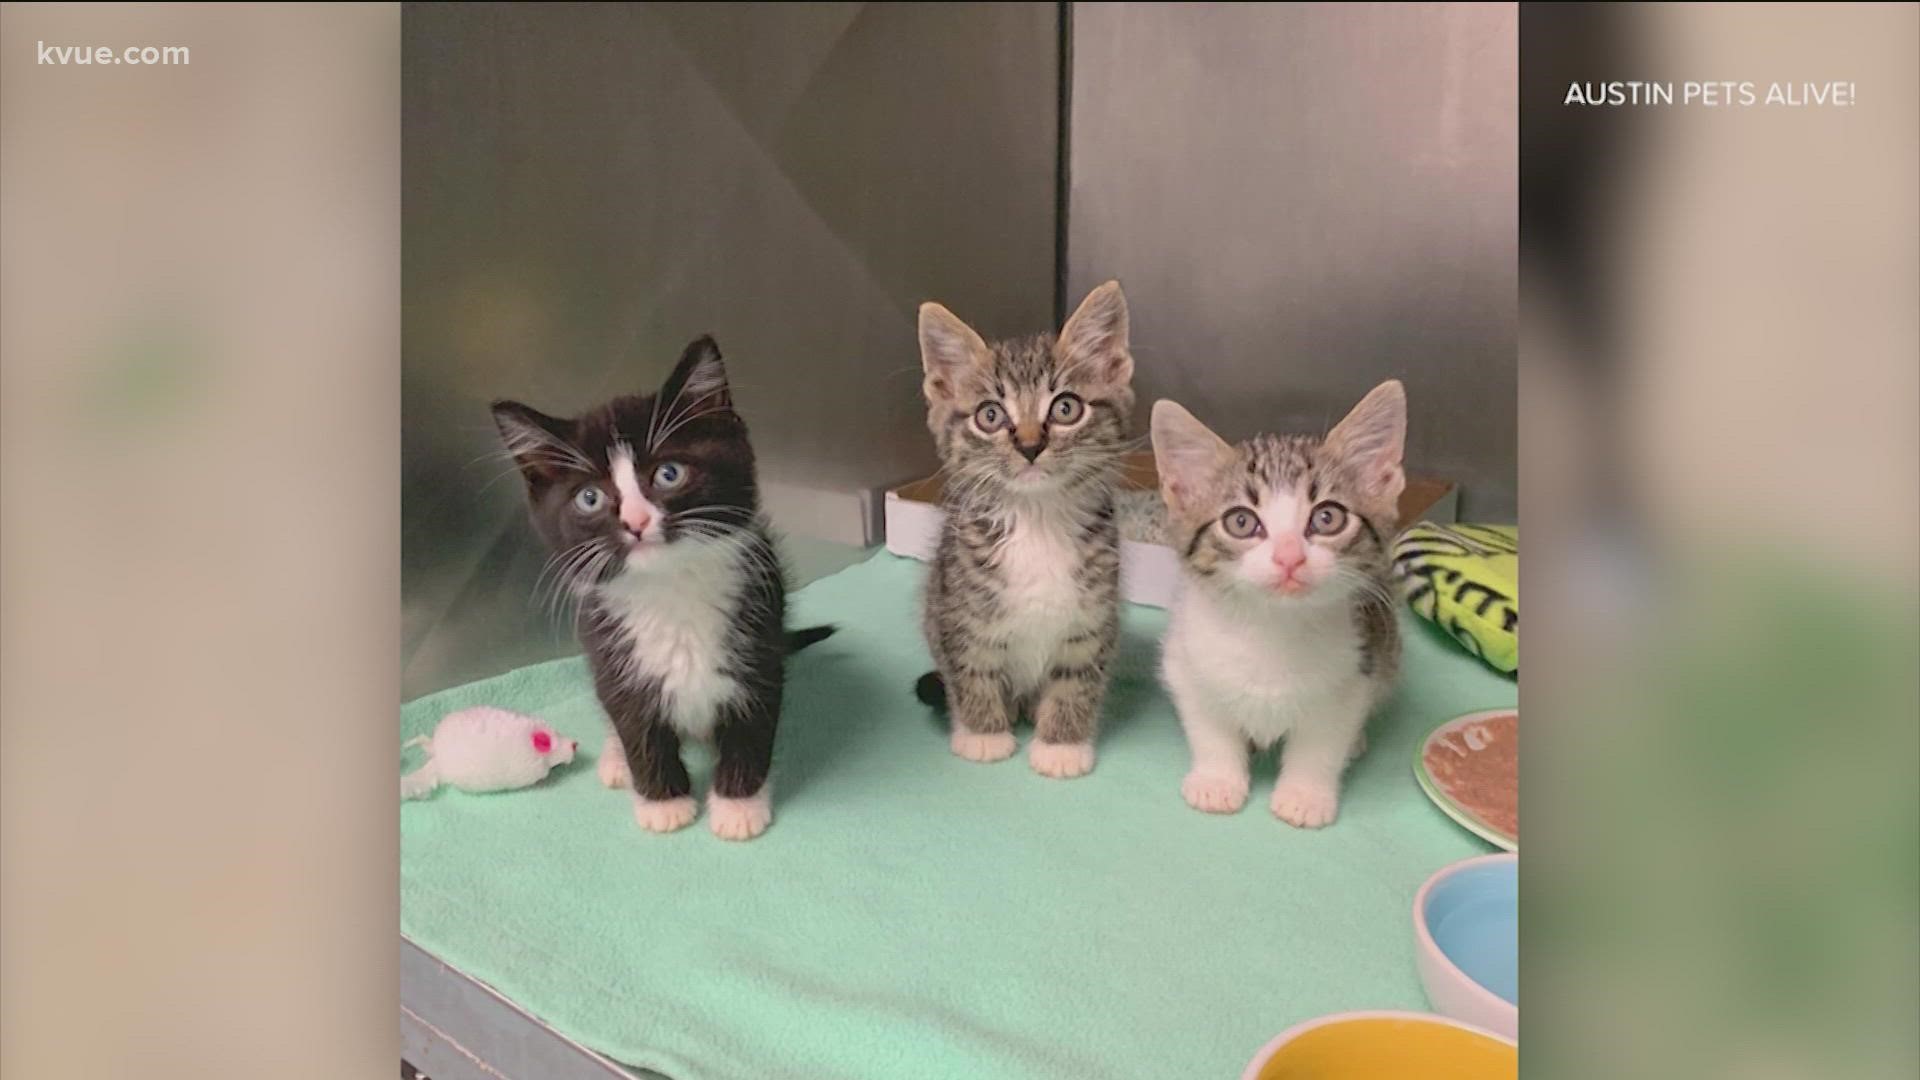 Austin Pets Alive! said it is in need of extra fosters this week as the shelter is already experiencing an influx of animals that have been evacuated from Louisiana.